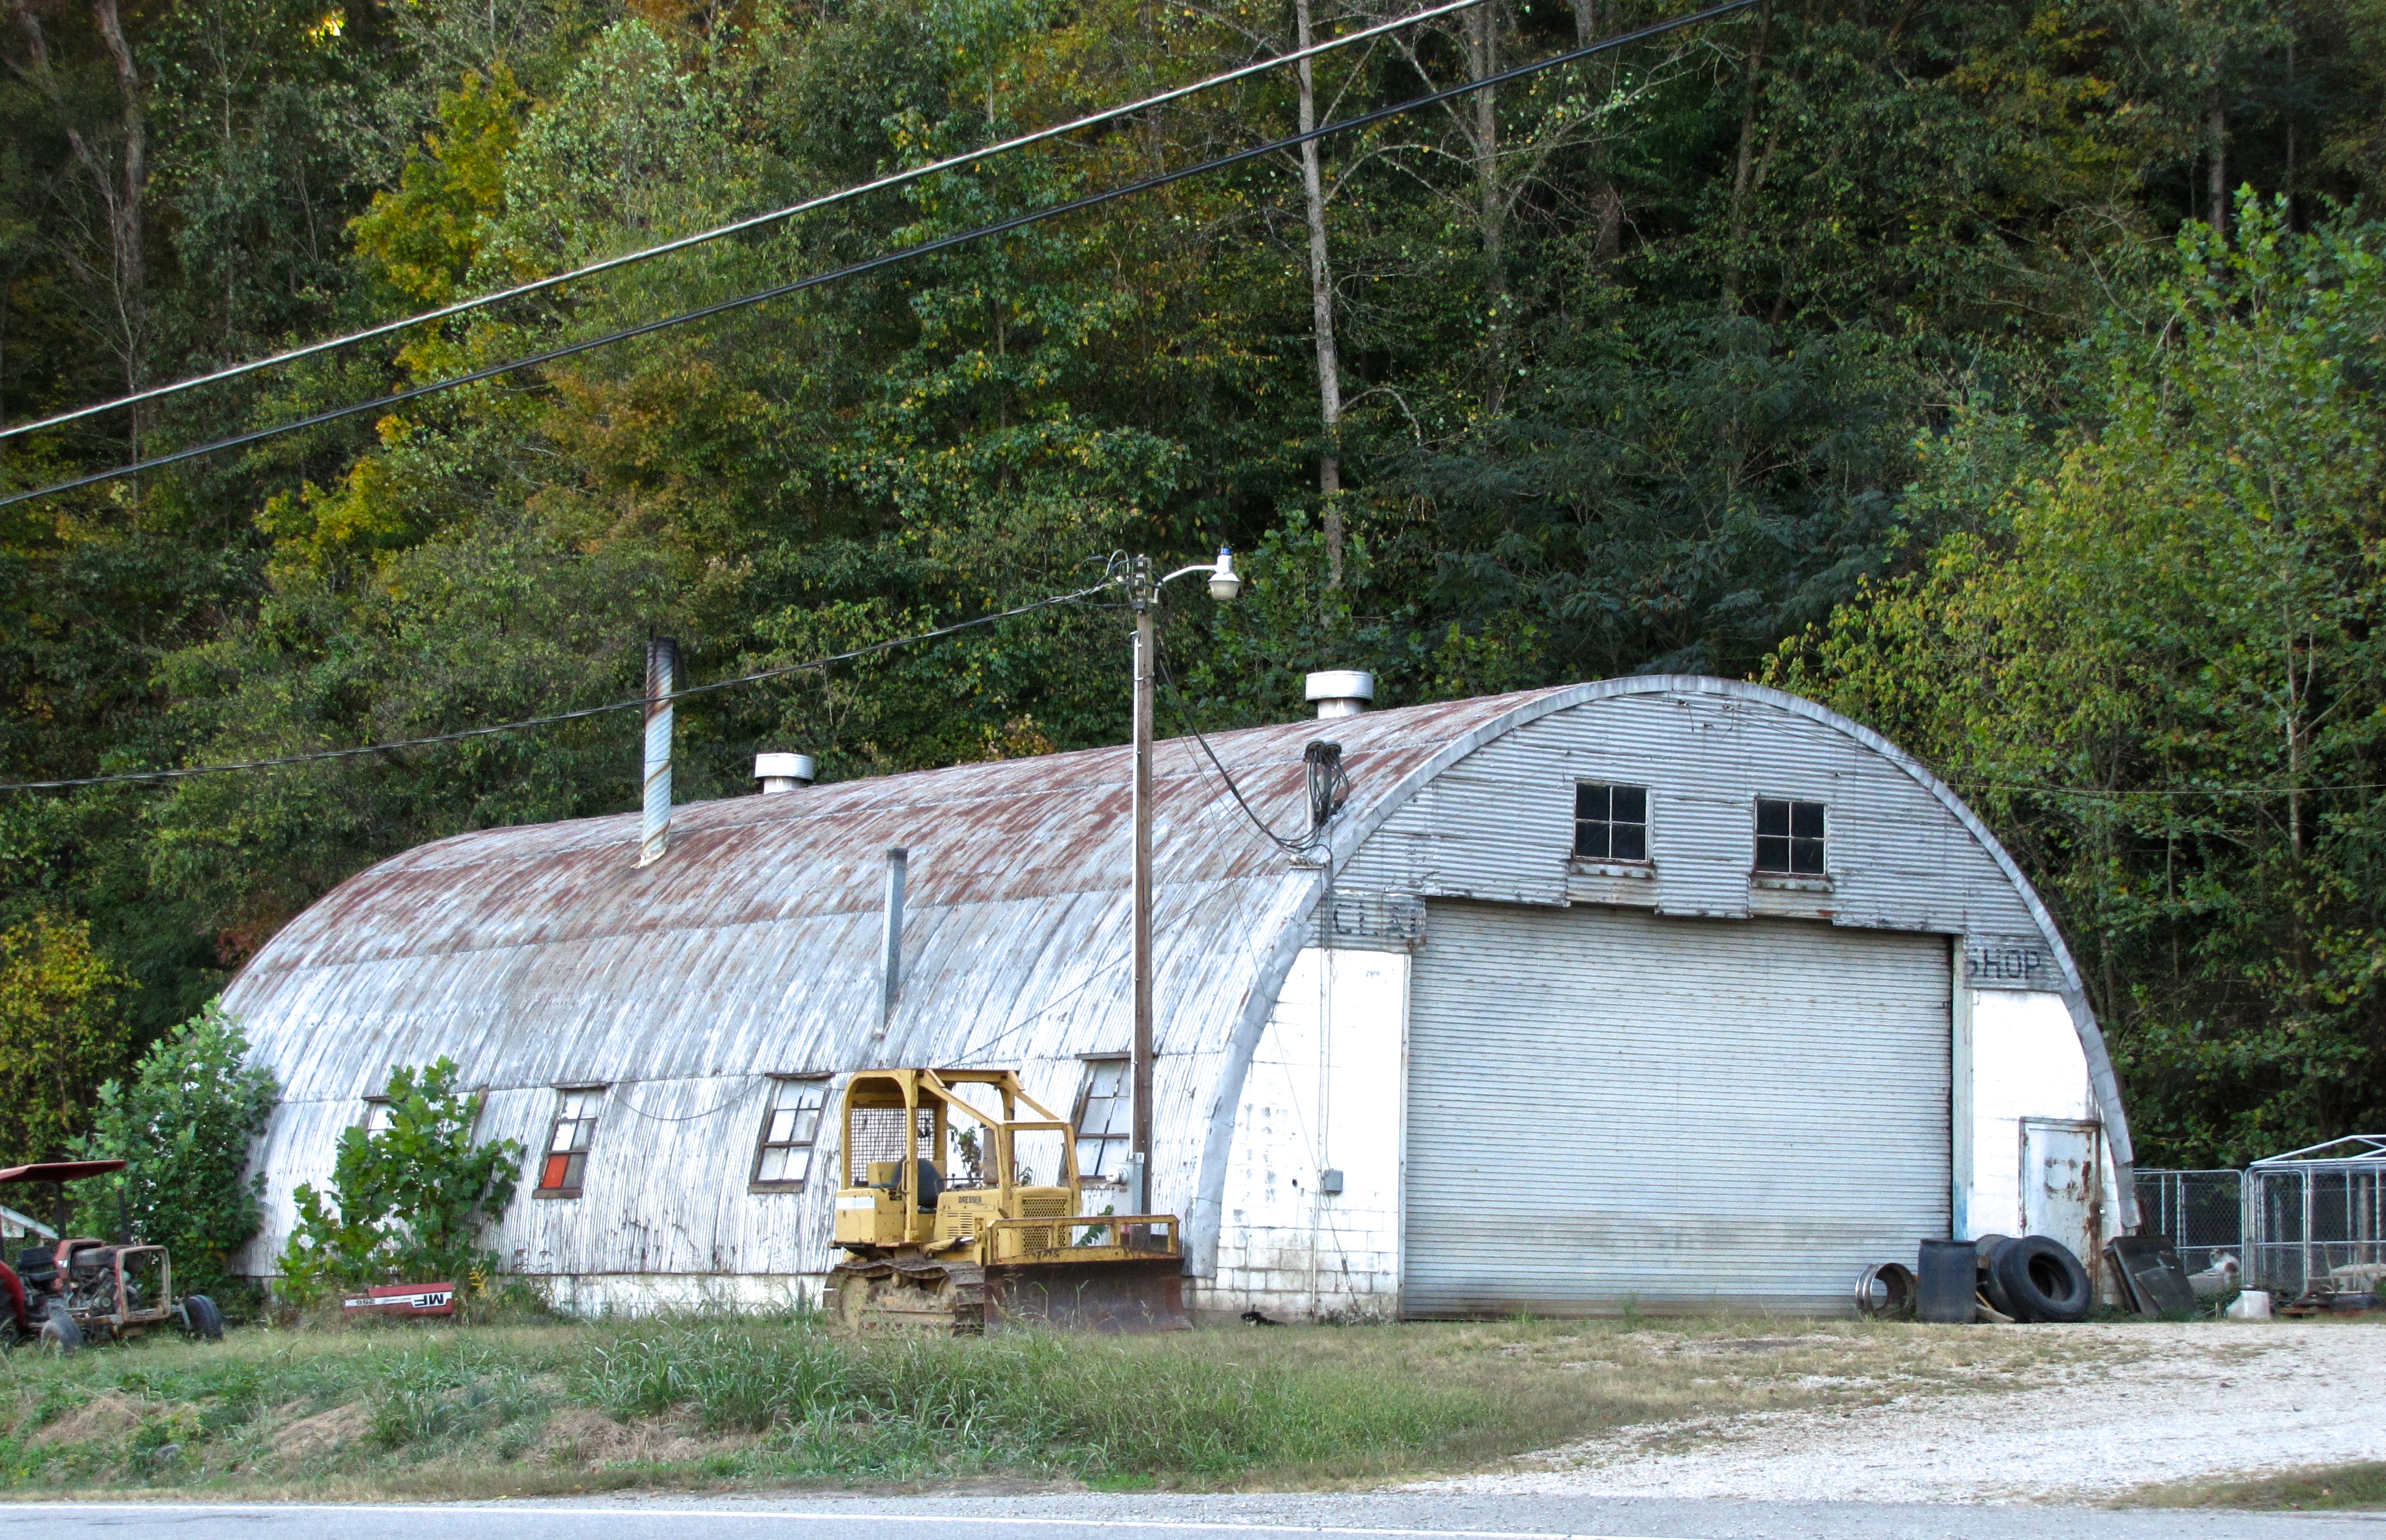 quonset hut in About Us, RI